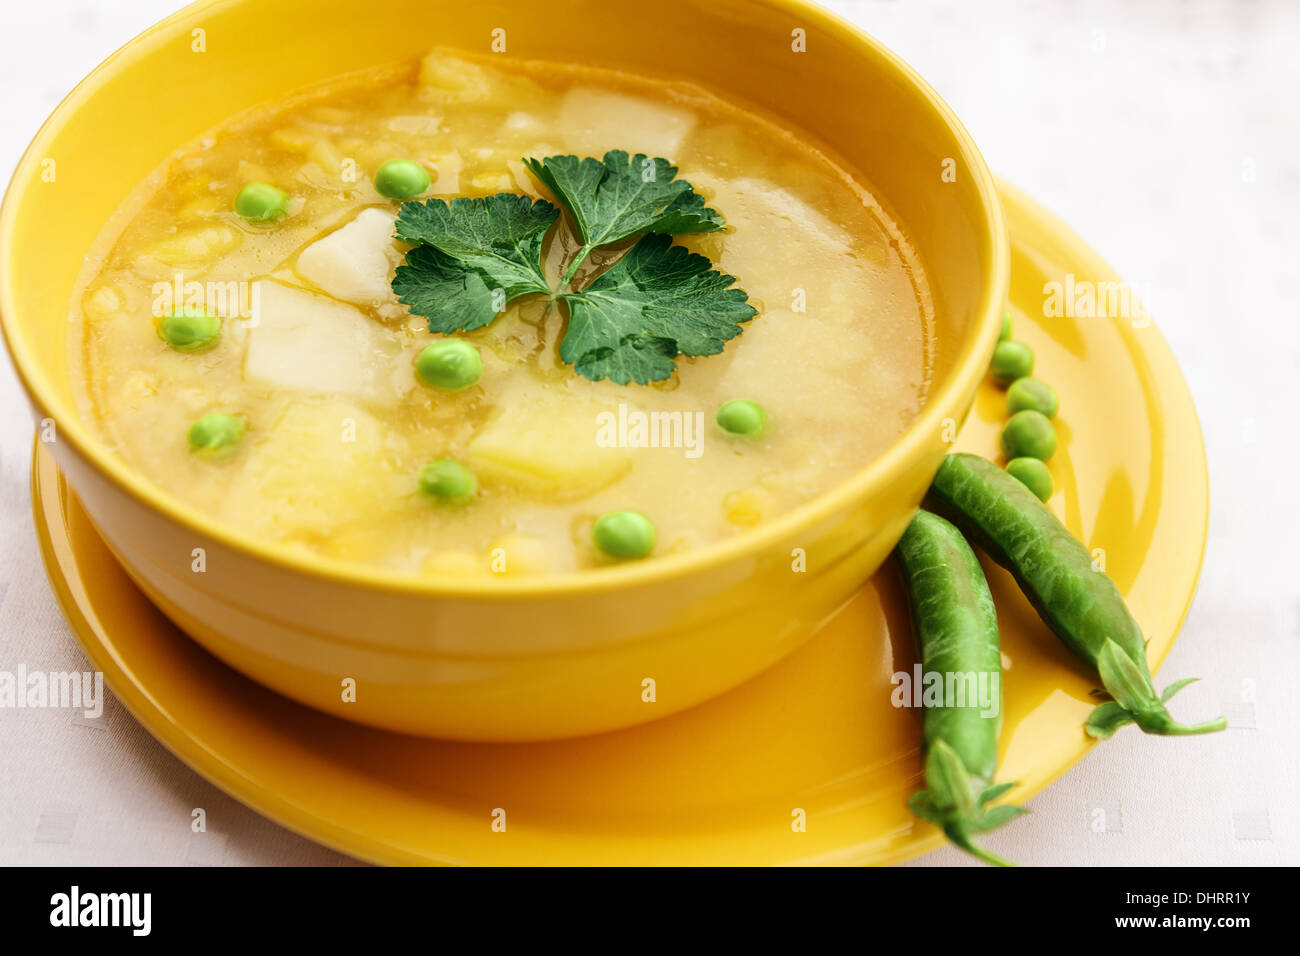 Meatless soup in round yellow cup. Stock Photo